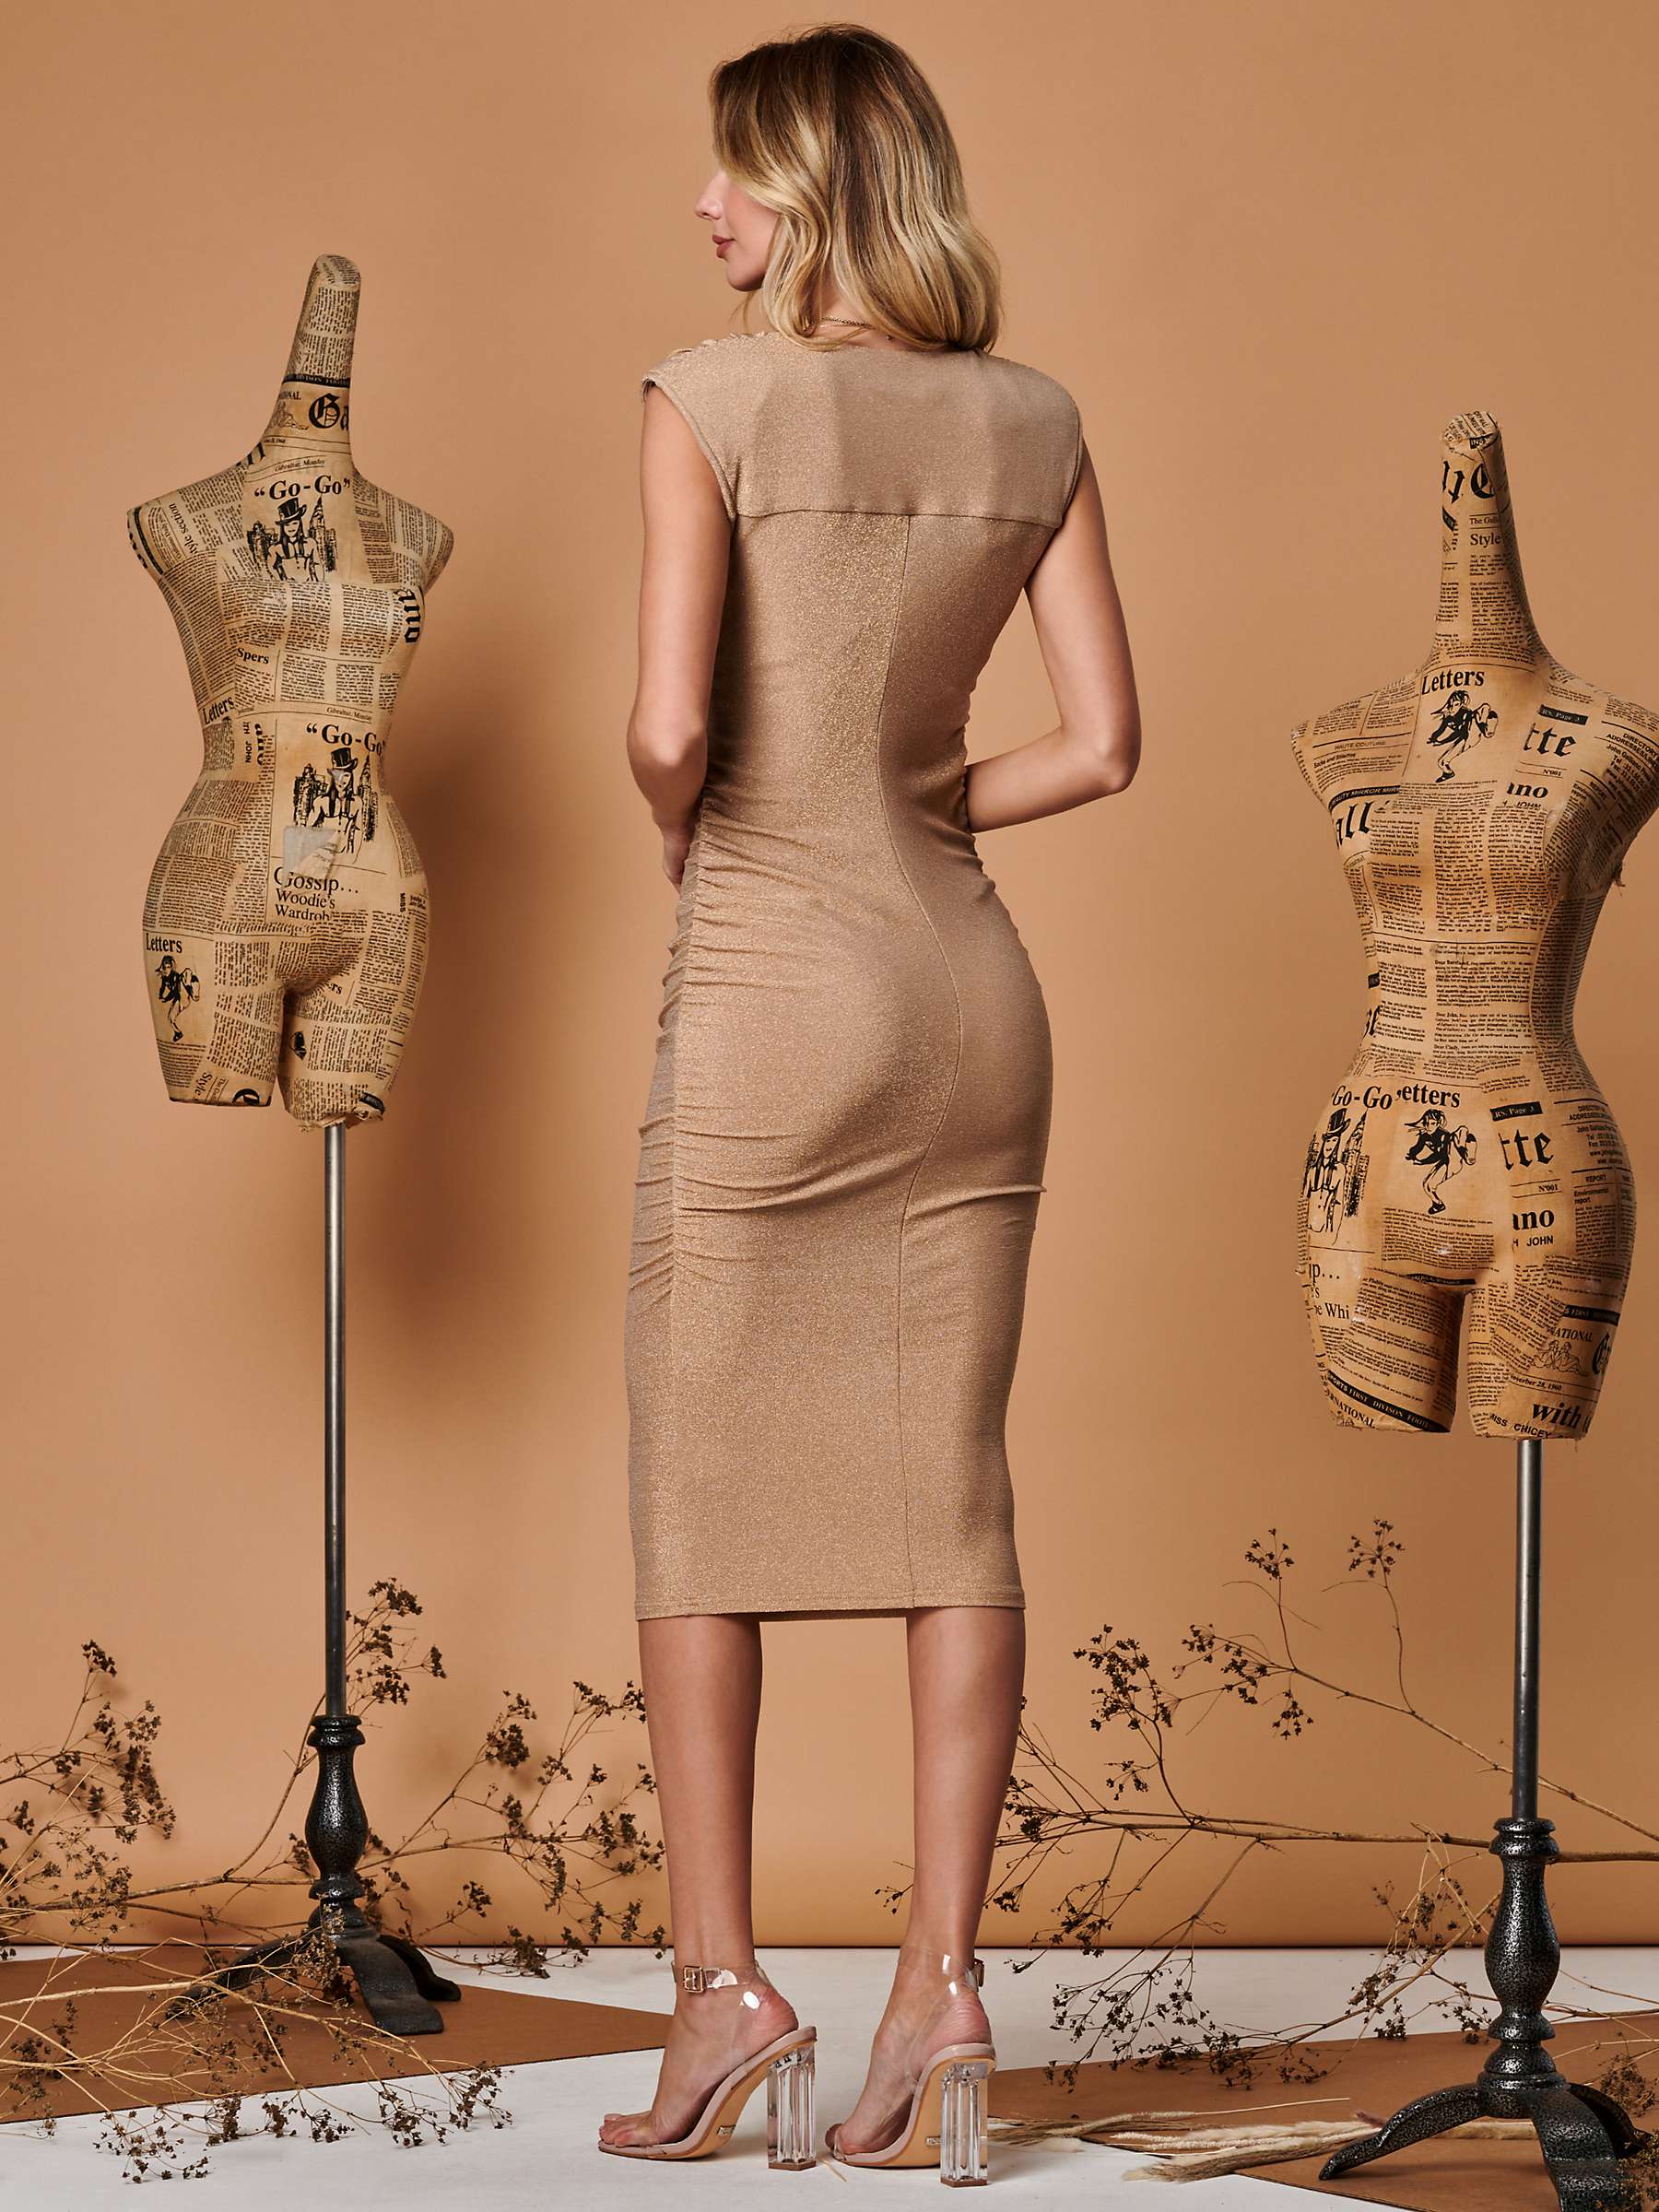 Buy Jolie Moi Metallic Sparkly Ruched Bodycon Dress Online at johnlewis.com